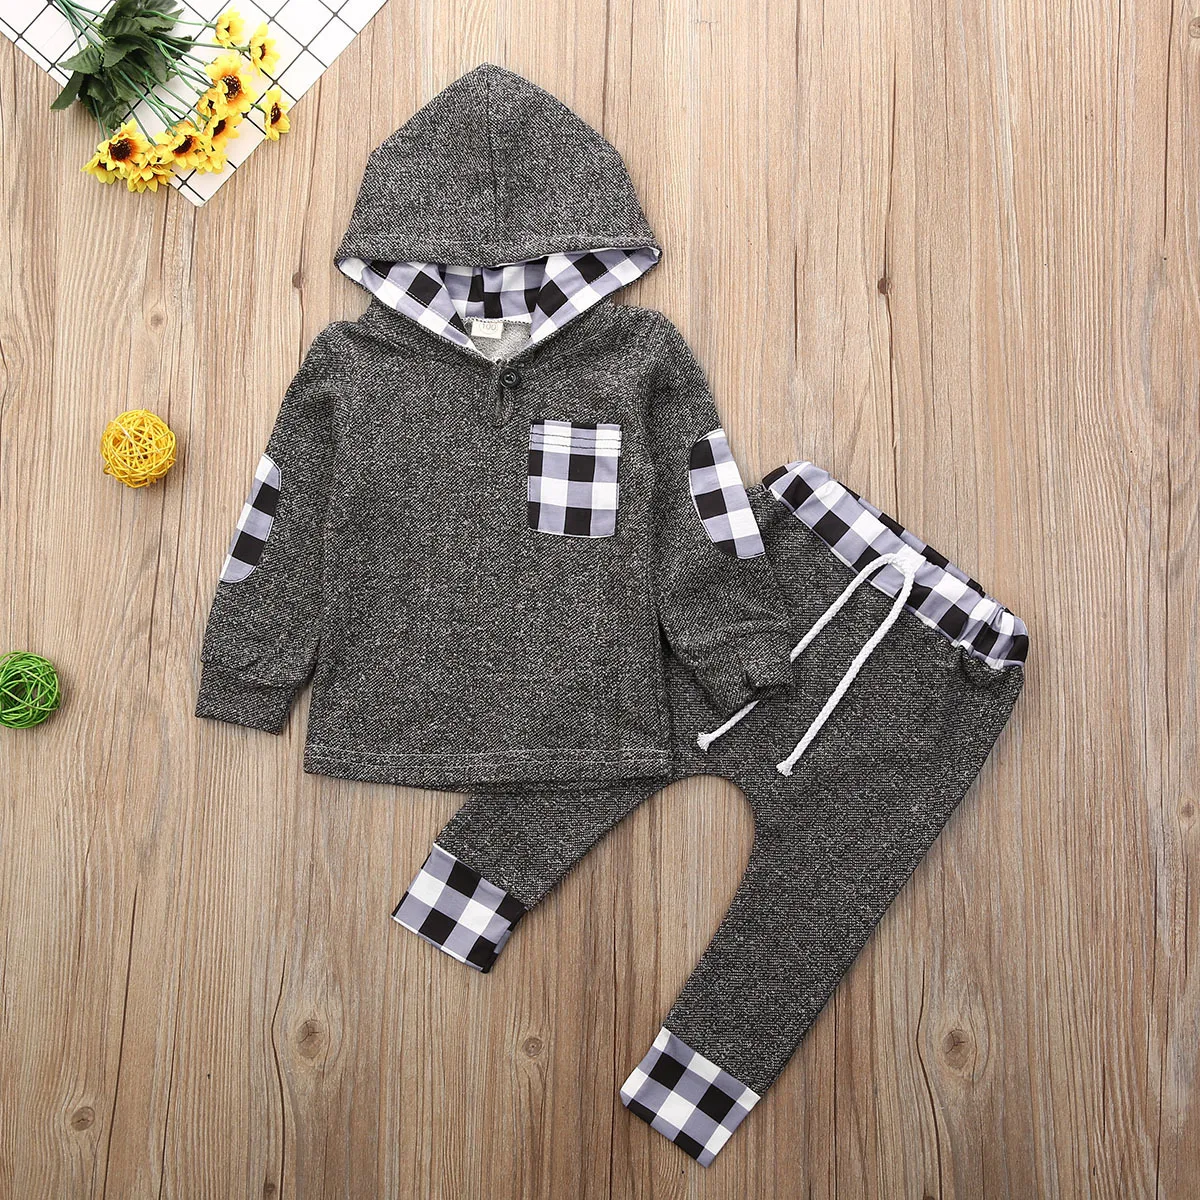 hooded sweater for baby boy